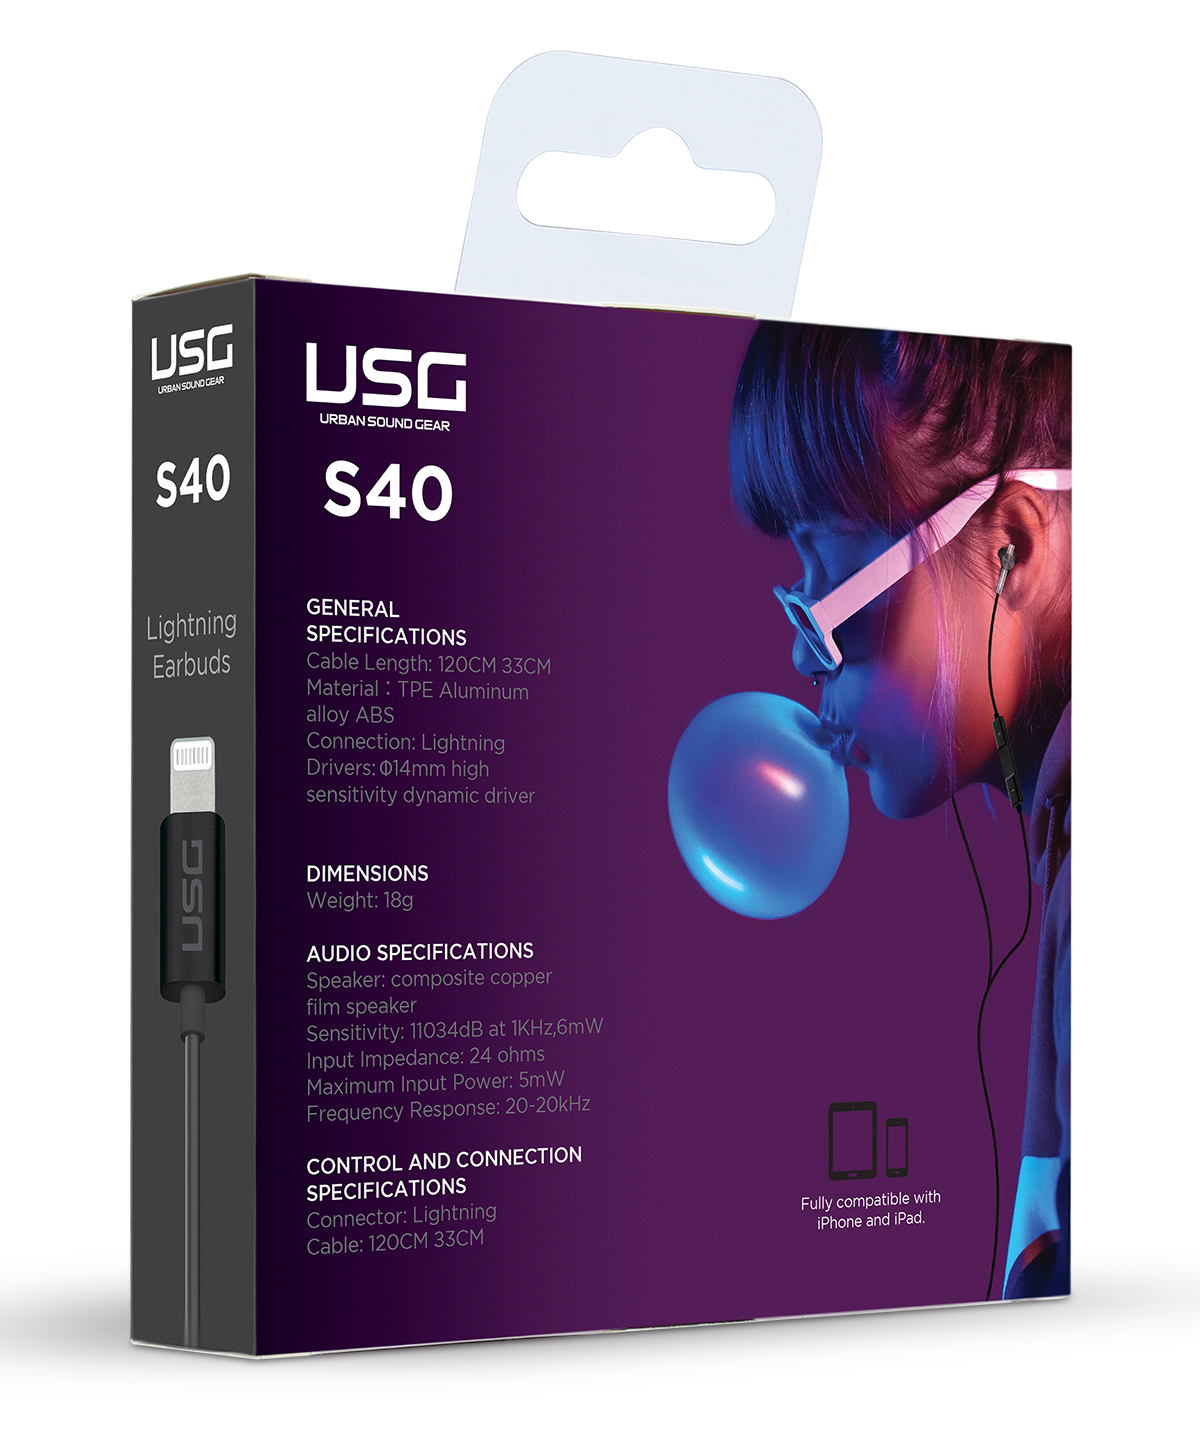 USG Earbuds with Lightning Connector - Black (MFi Certified by Apple)